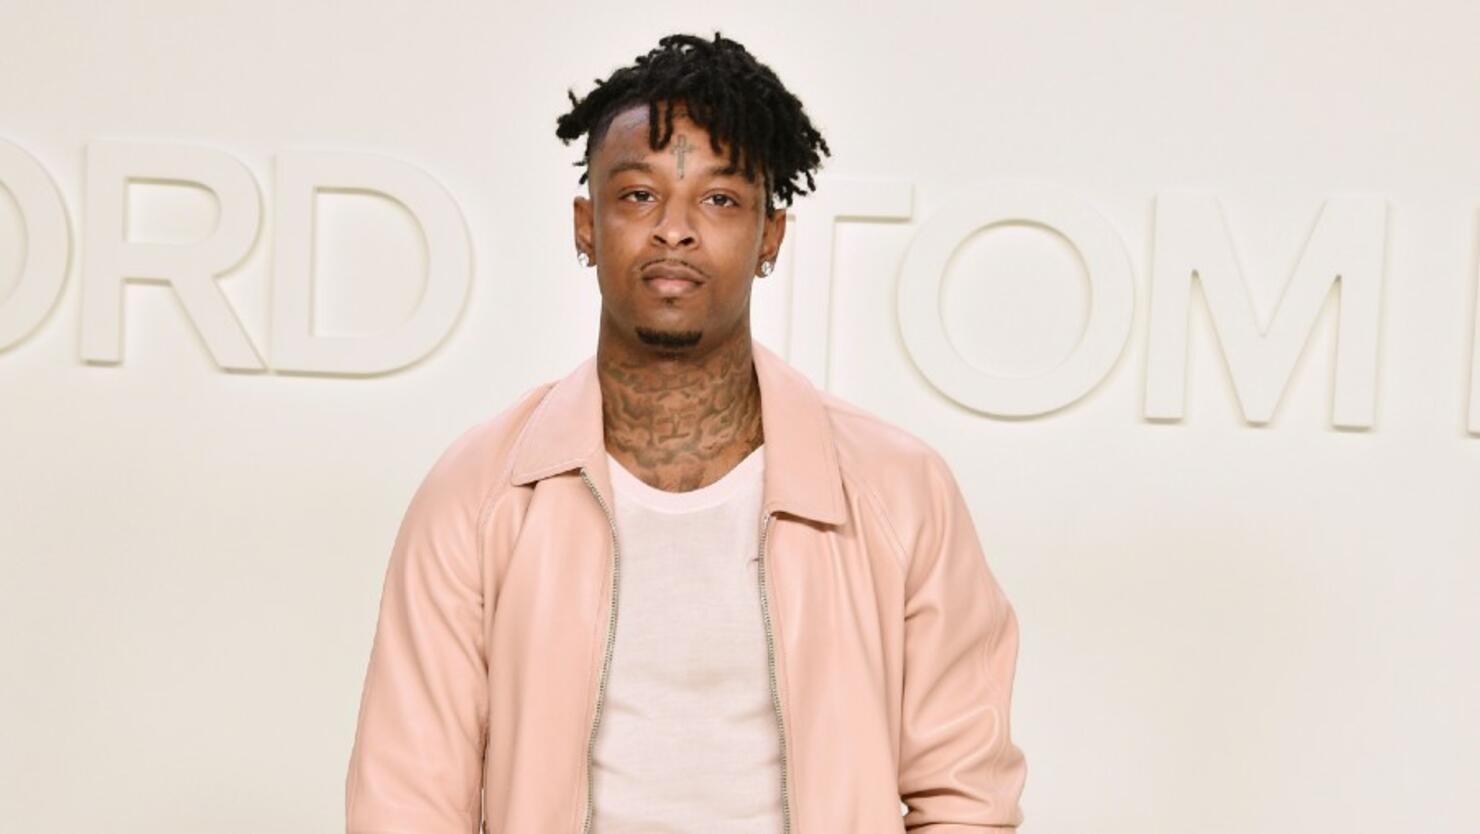 21 Savage launches free online financial program for youth